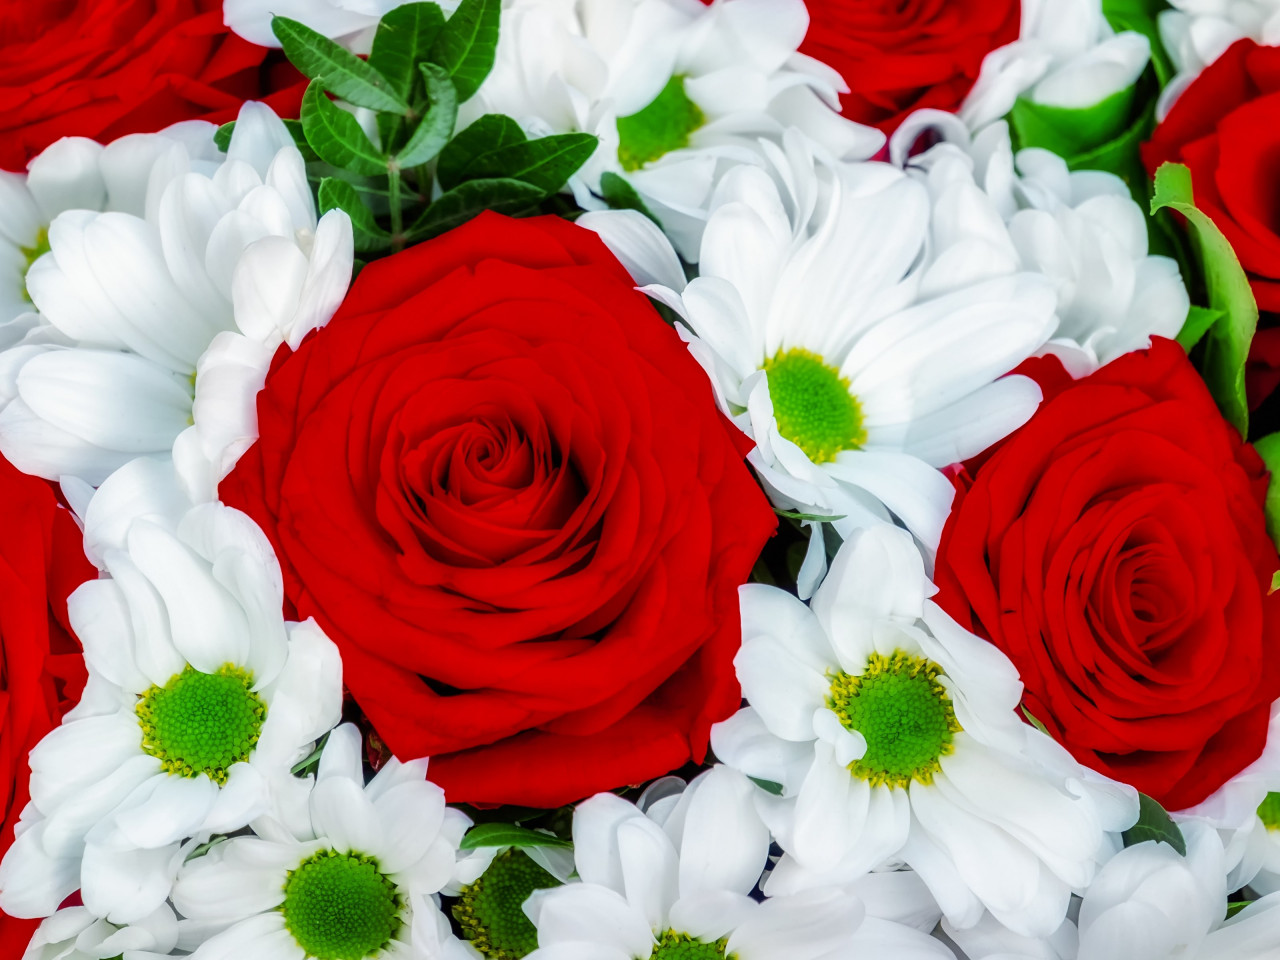 Roses and daisies bouquet wallpaper 1280x960